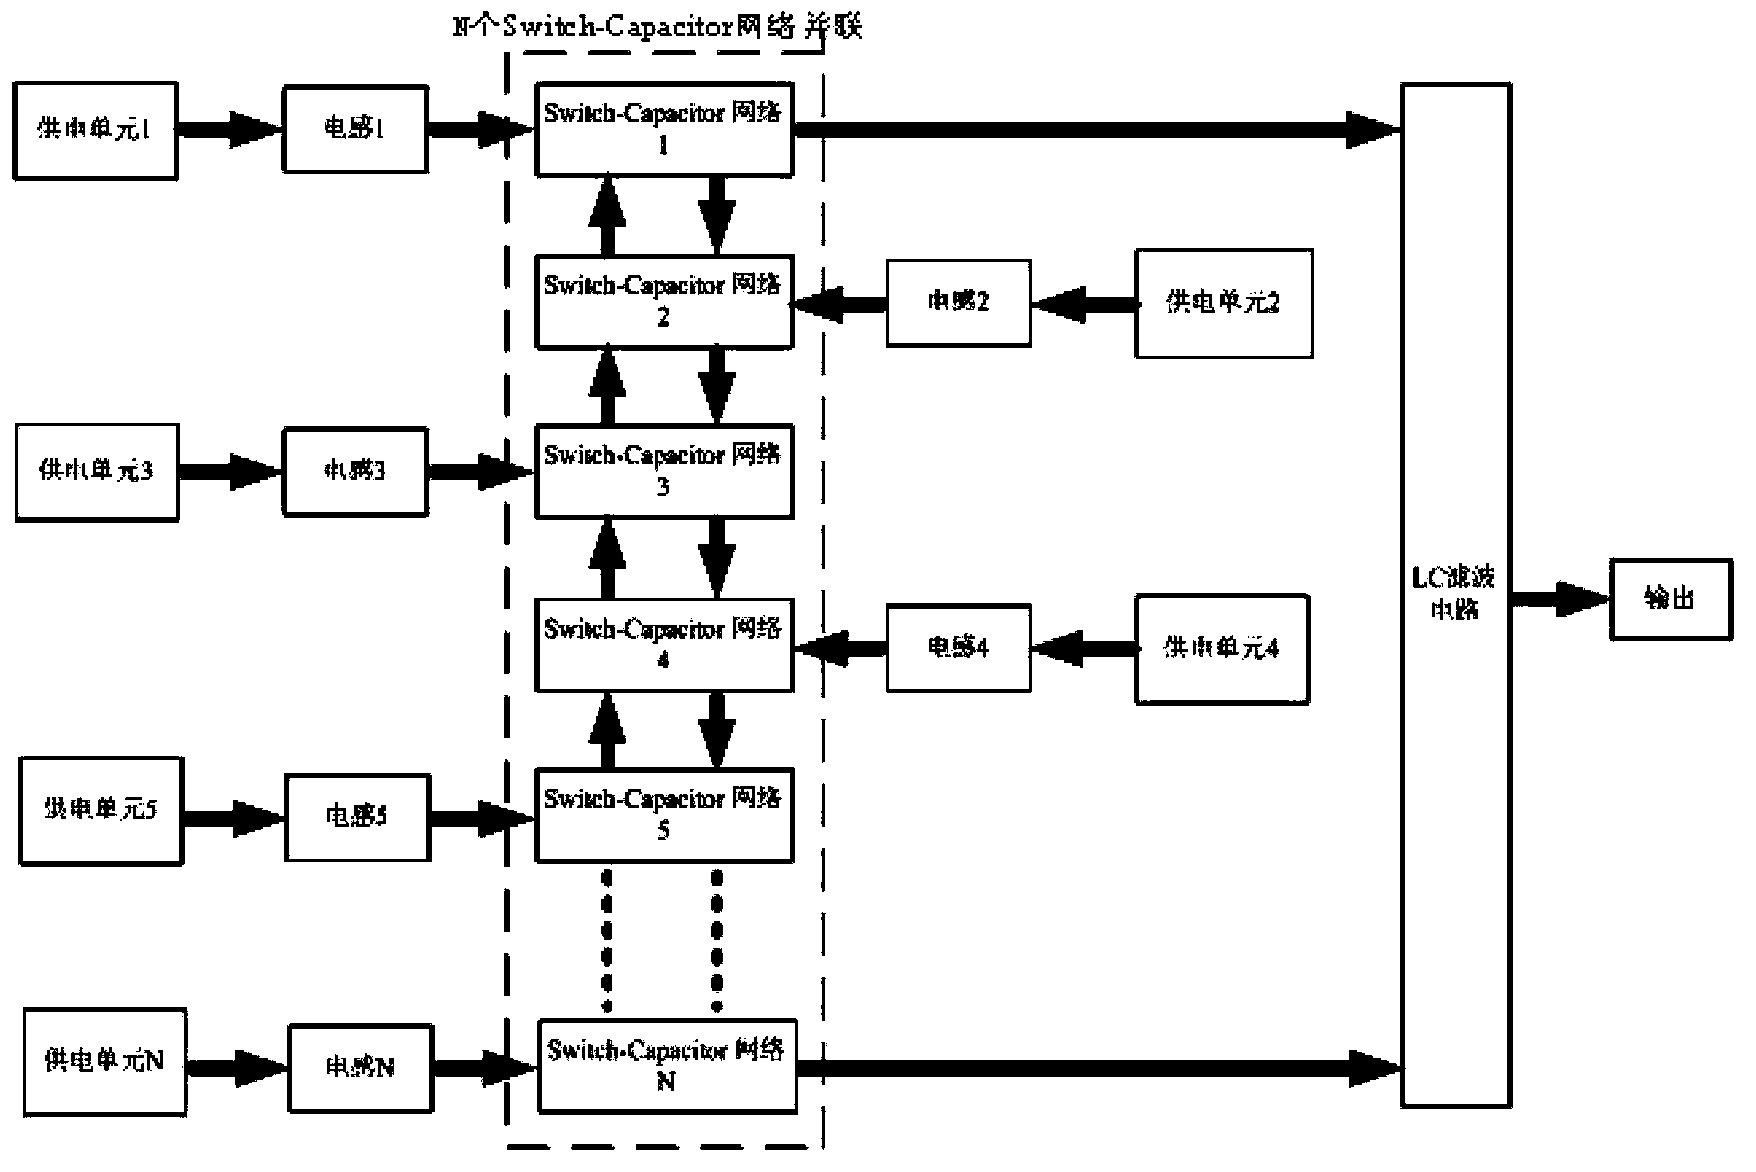 Multi-input boost converter based on Switch-Capacitor networks